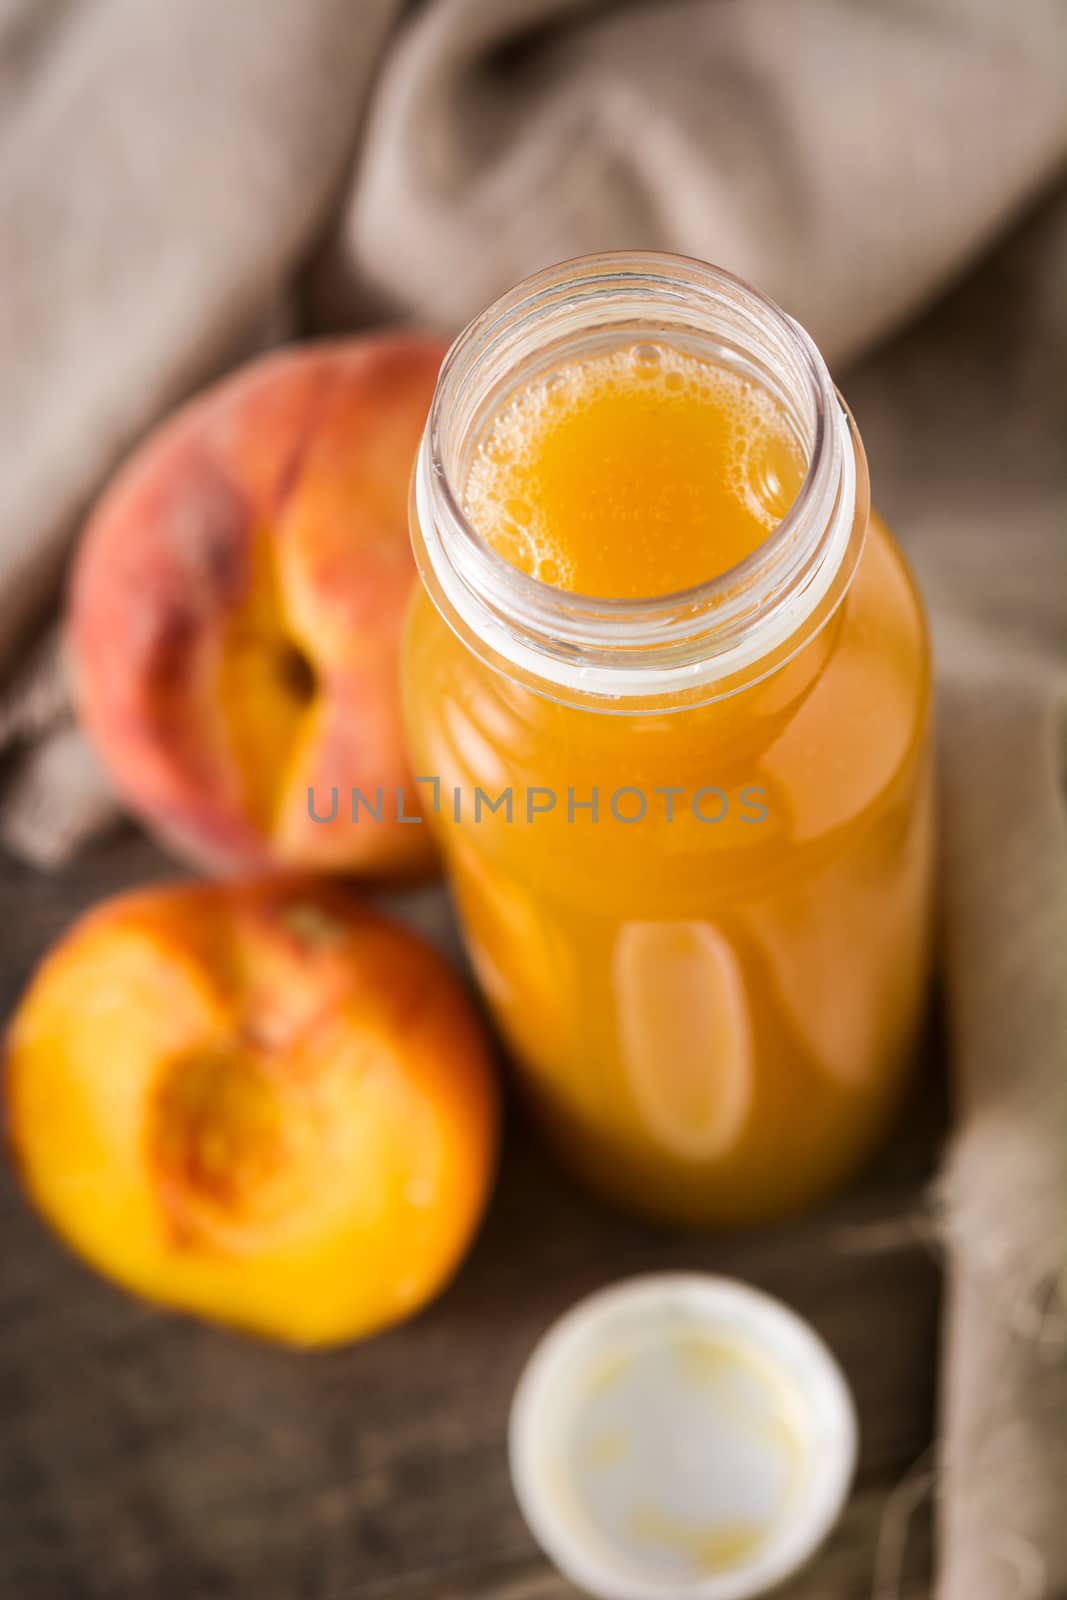 Peach juice in glass  by chandlervid85